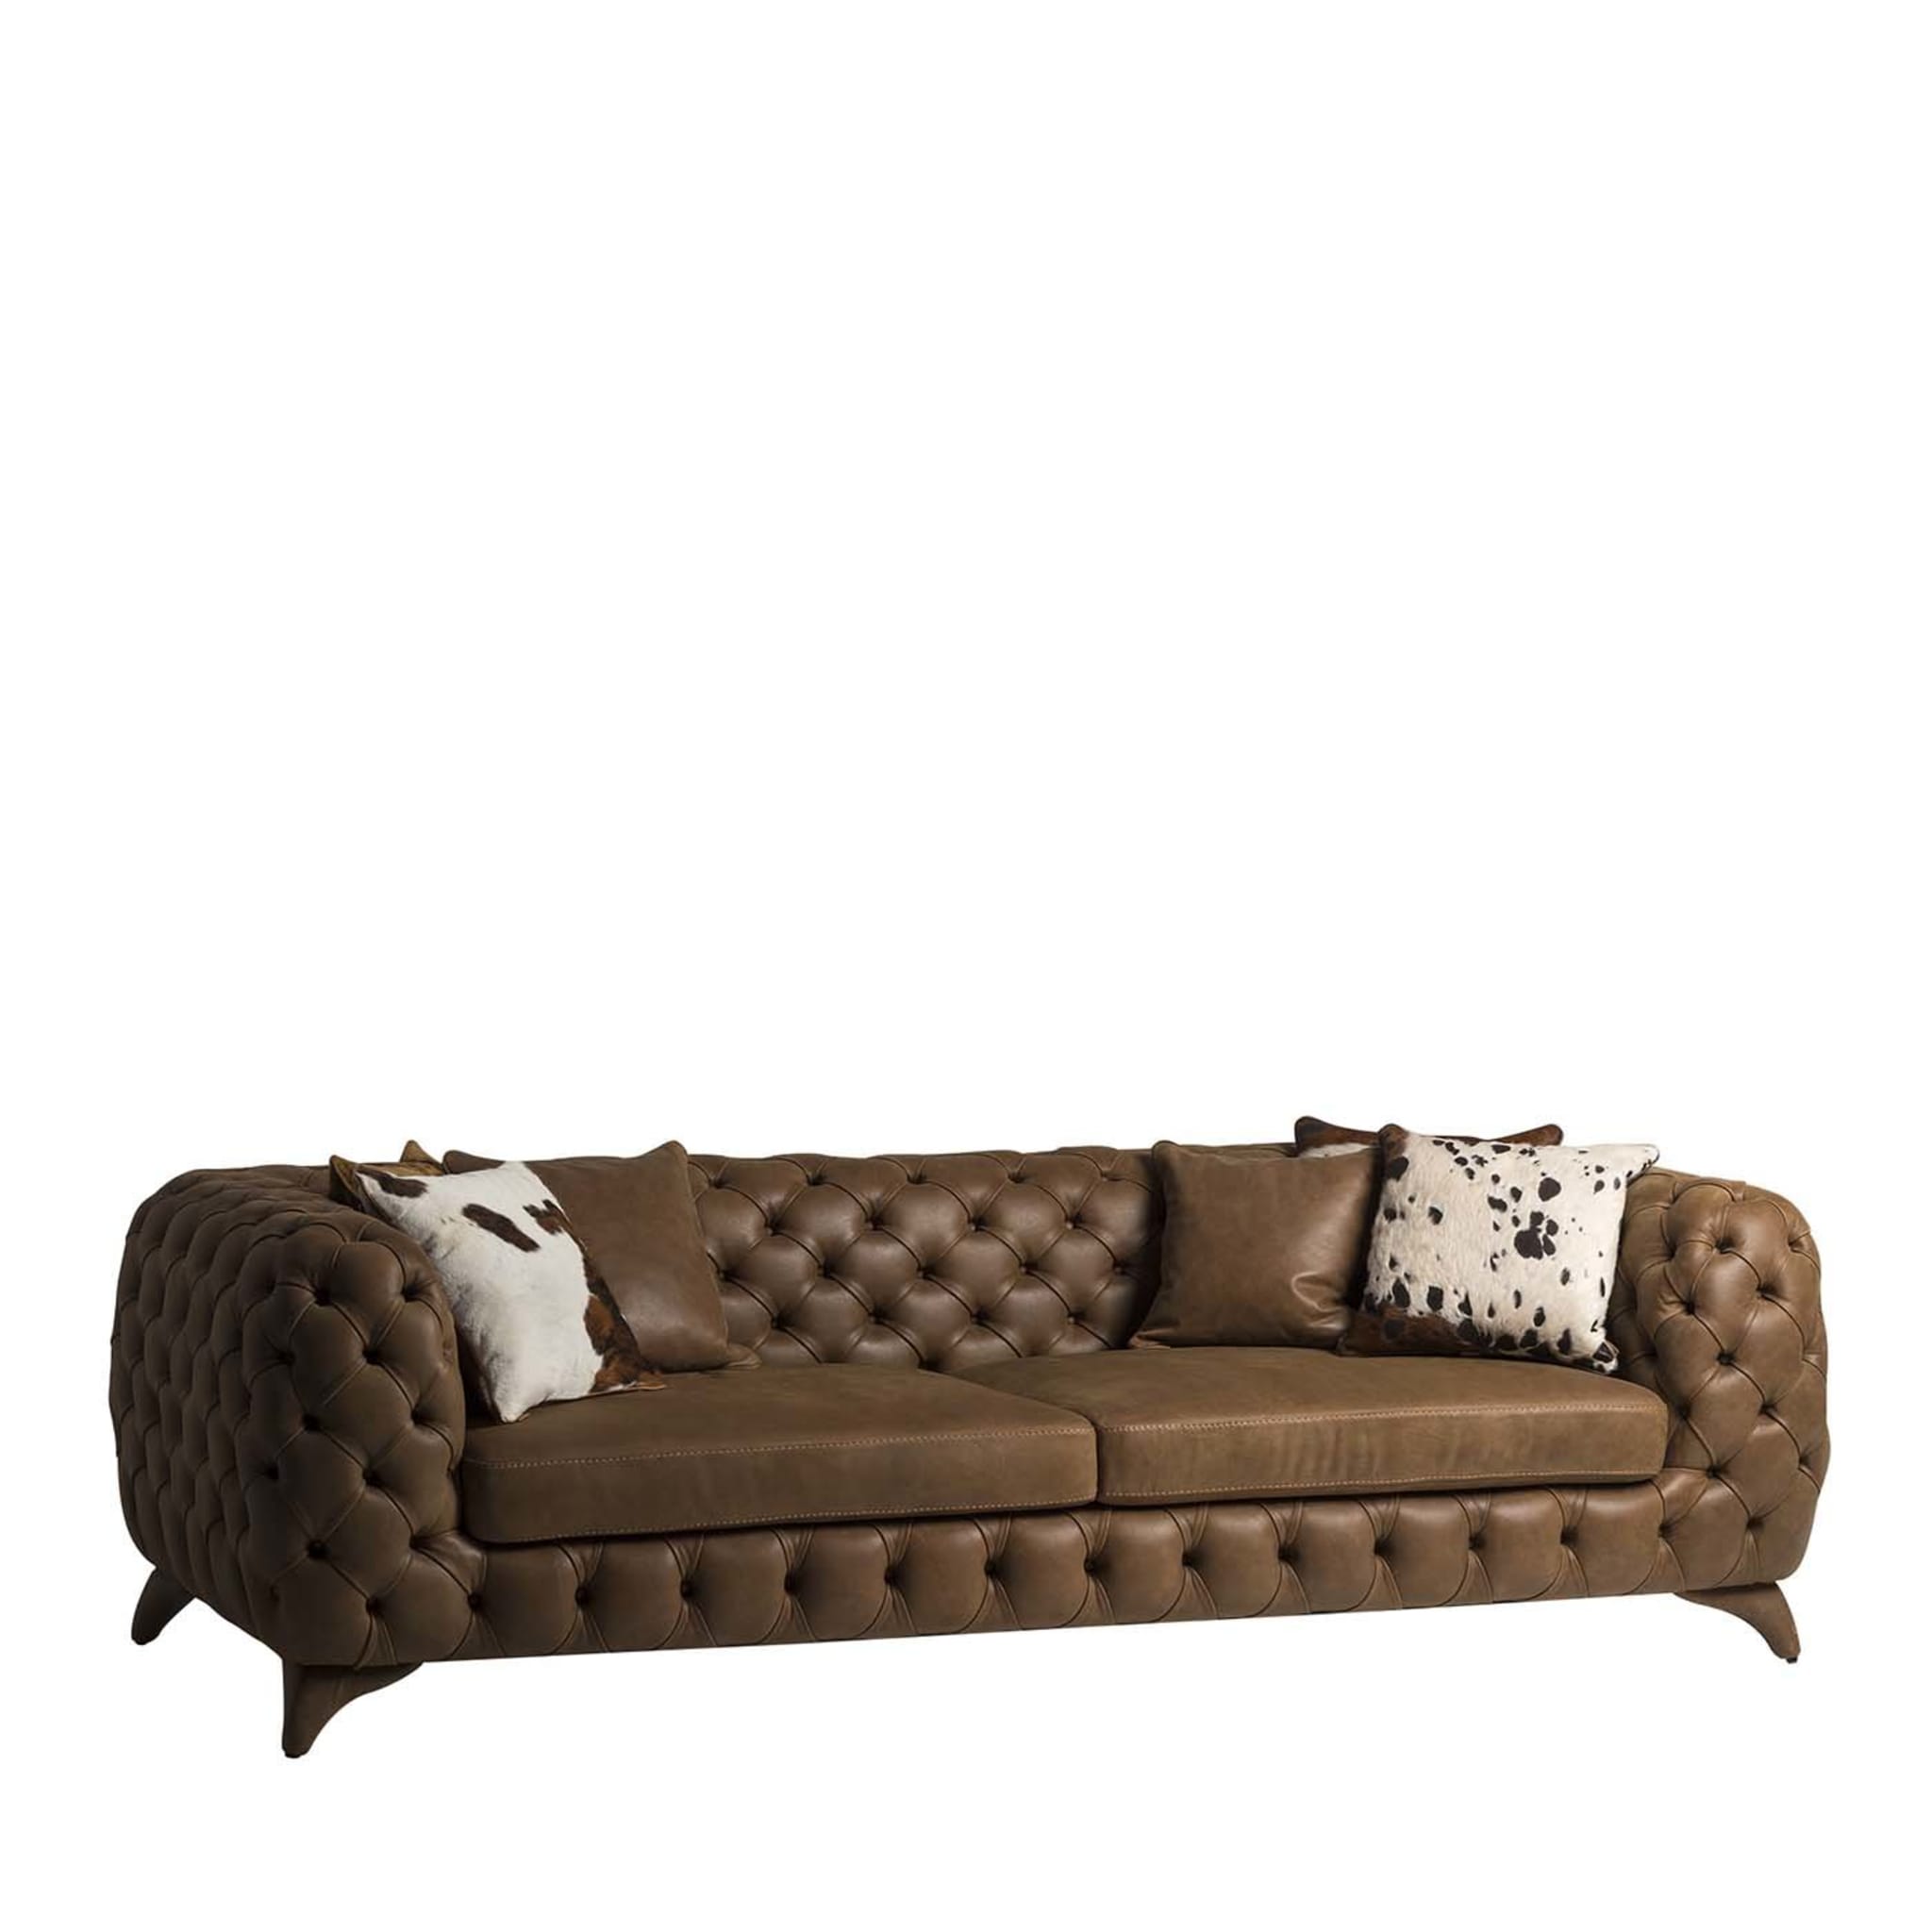 Isidoro 3-Seater Sofa Tribeca Collection by Marco and Giulio Mantellassi - Main view